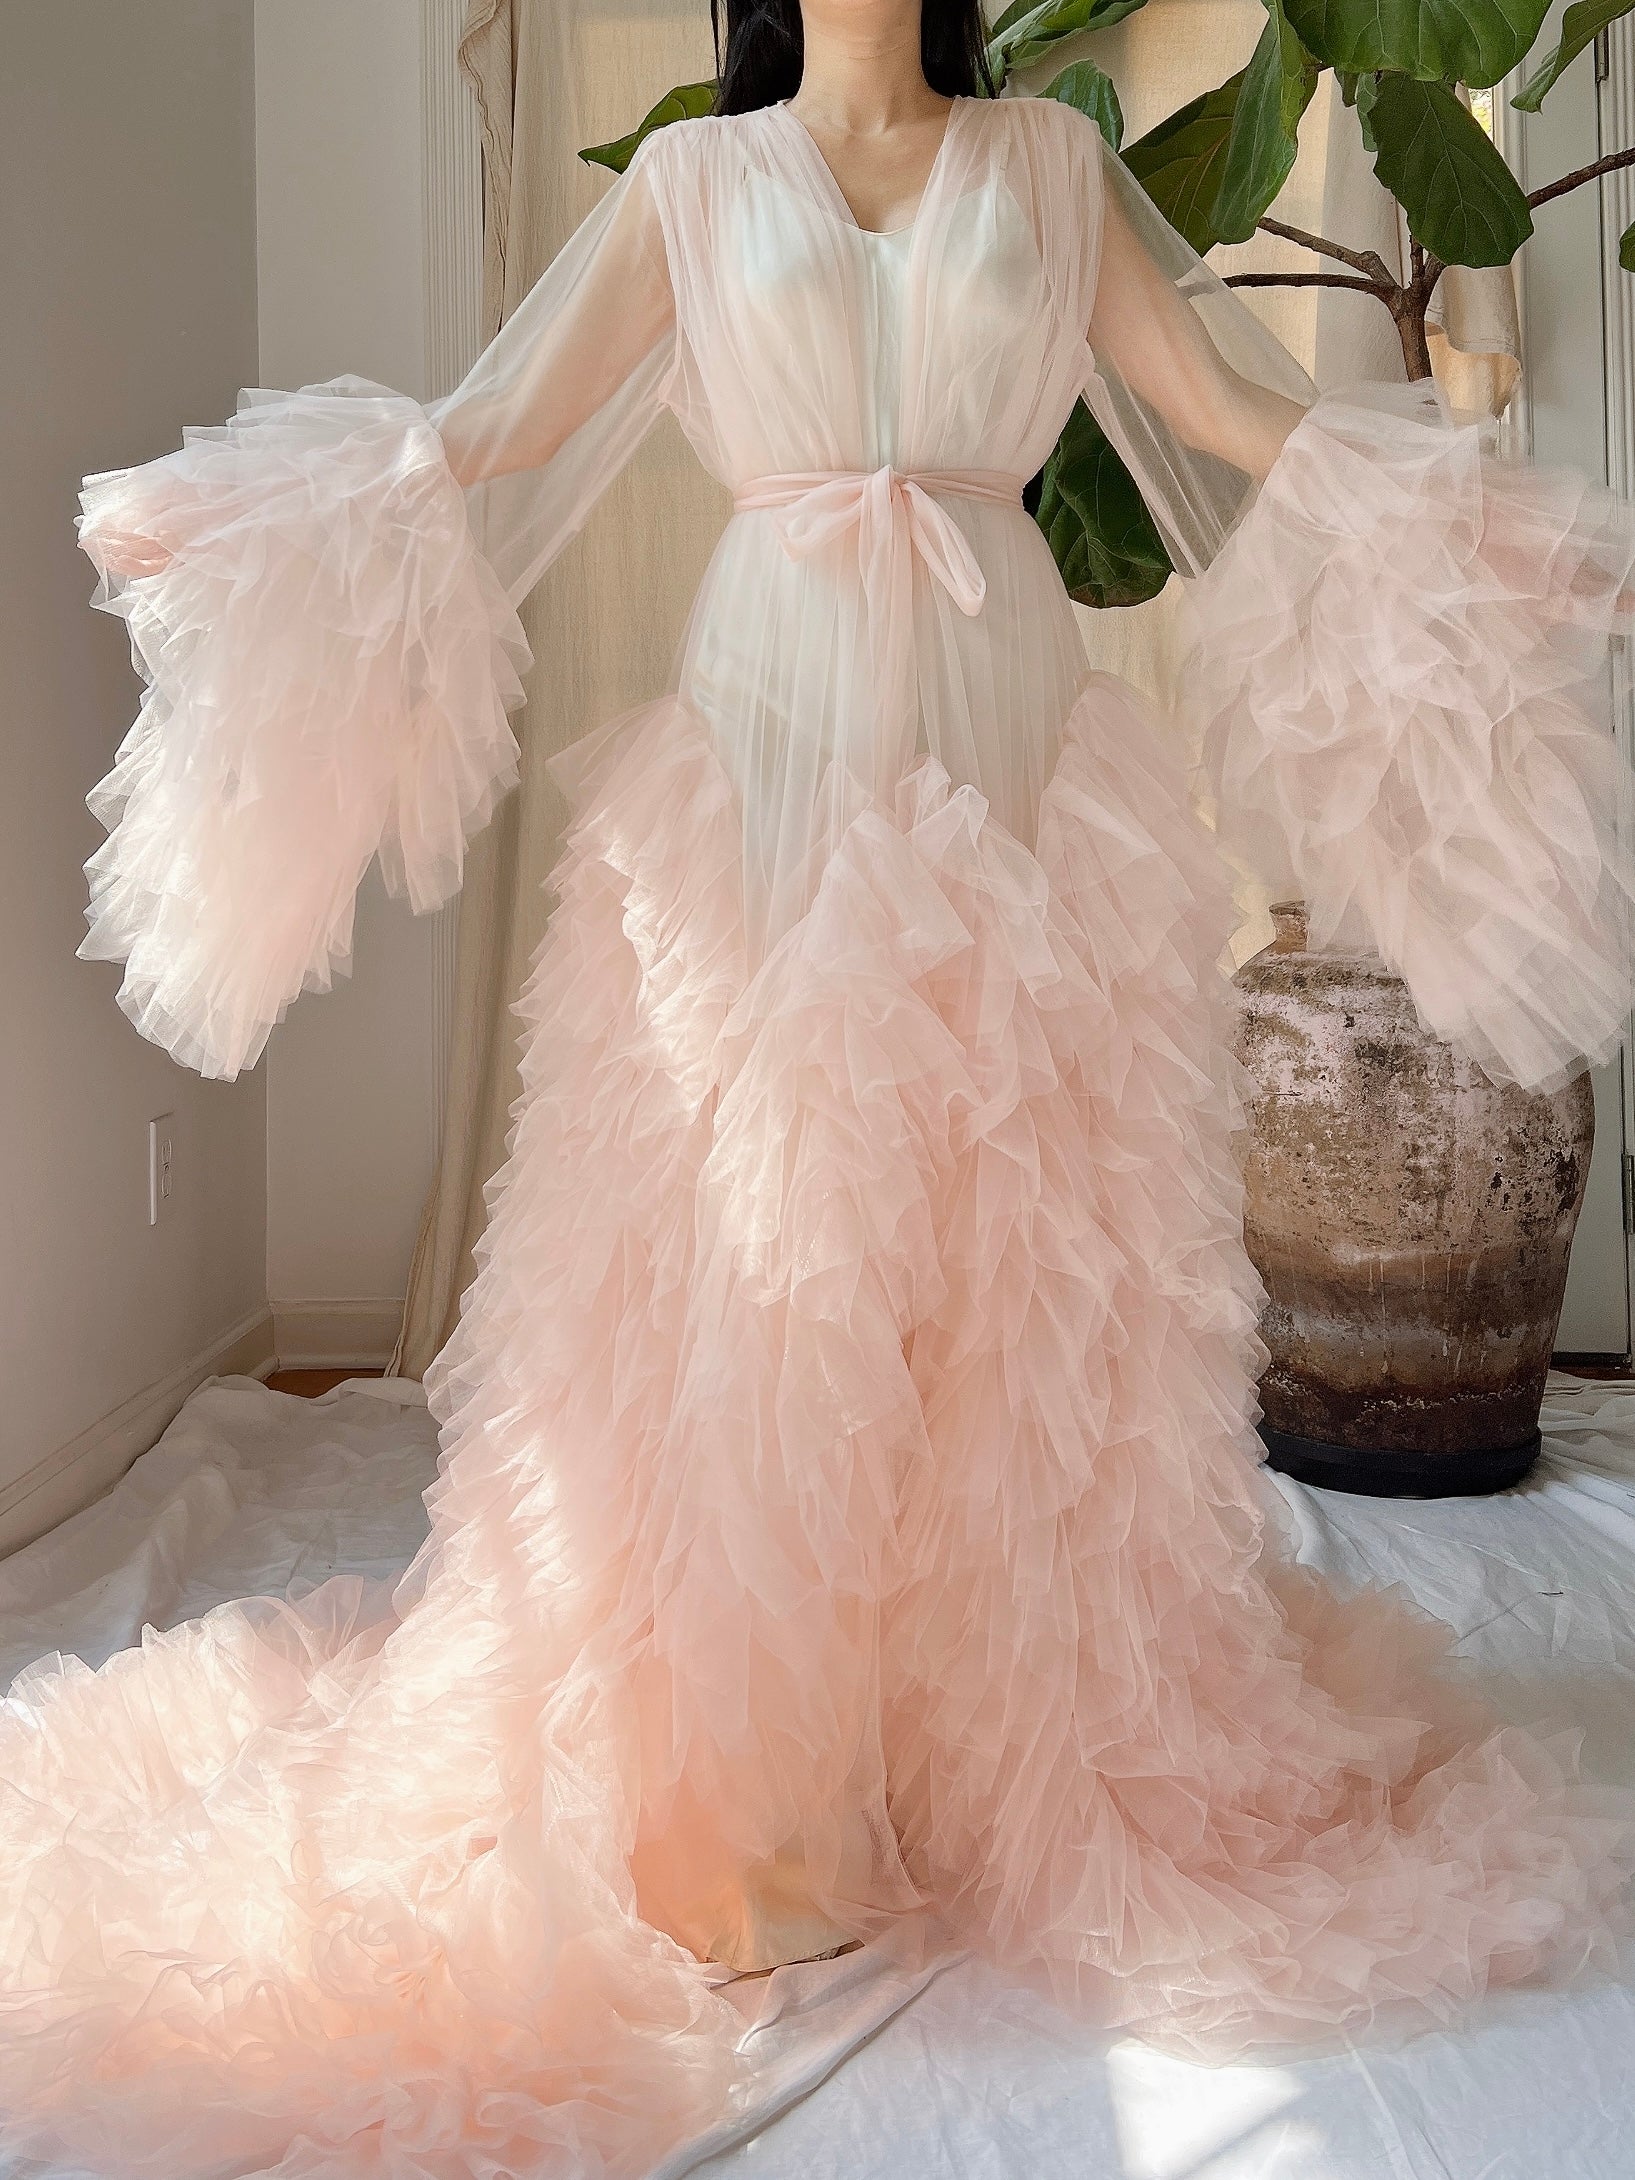 Tulle Ruffle Dressing Gown - OSFM